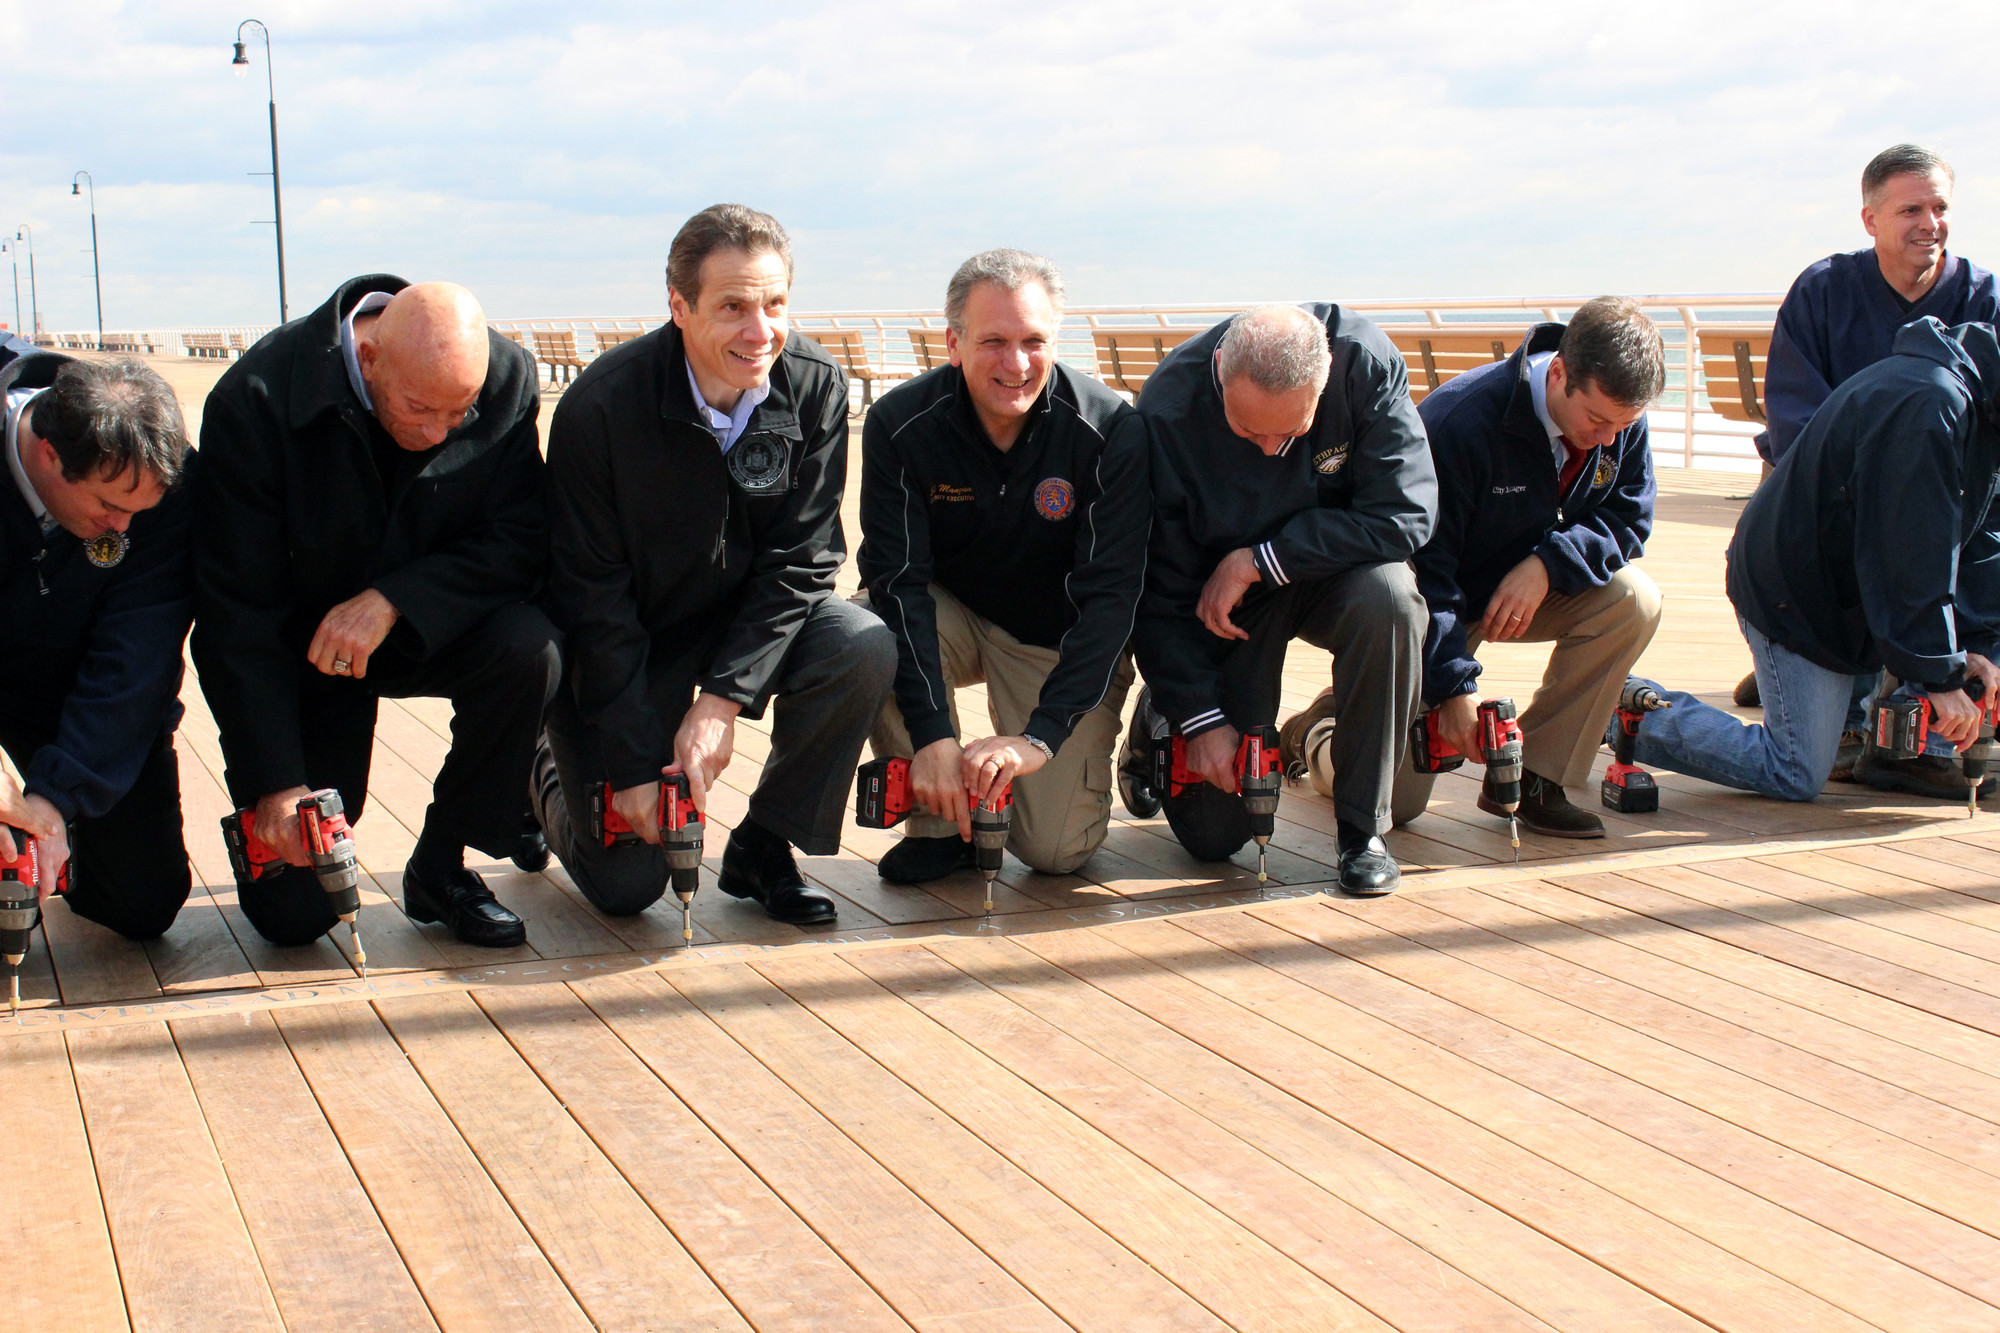 City Councilman Scott Mandel, far left, former State Assemblyman Harvey Weisenberg, Gov. Andrew Cuomo, Nassau County Executive Ed Mangano, Sen. Charles Schumer and City Manager Jack Schnirman screwed in the last plank of the new boardwalk in 2013.